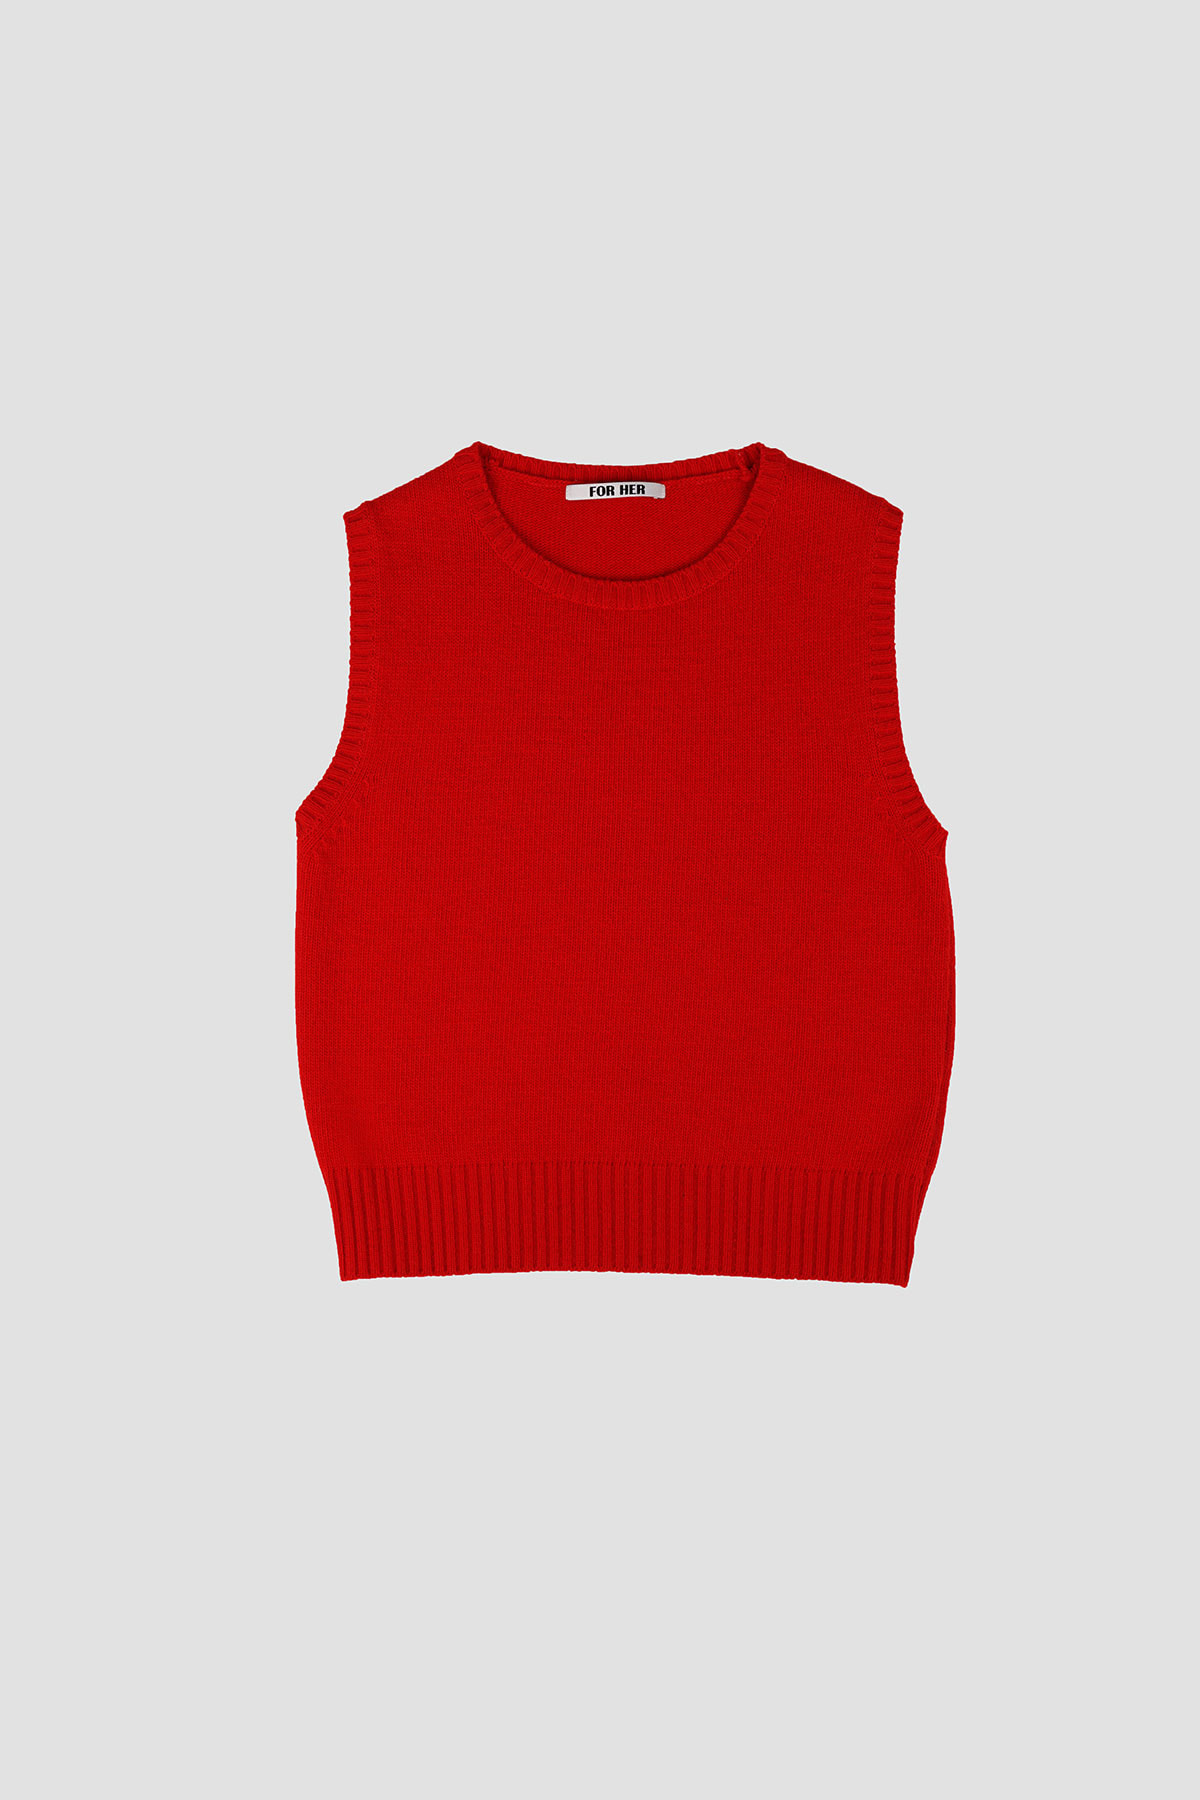 FOR HER ROUND KNIT VEST (RED) 3차